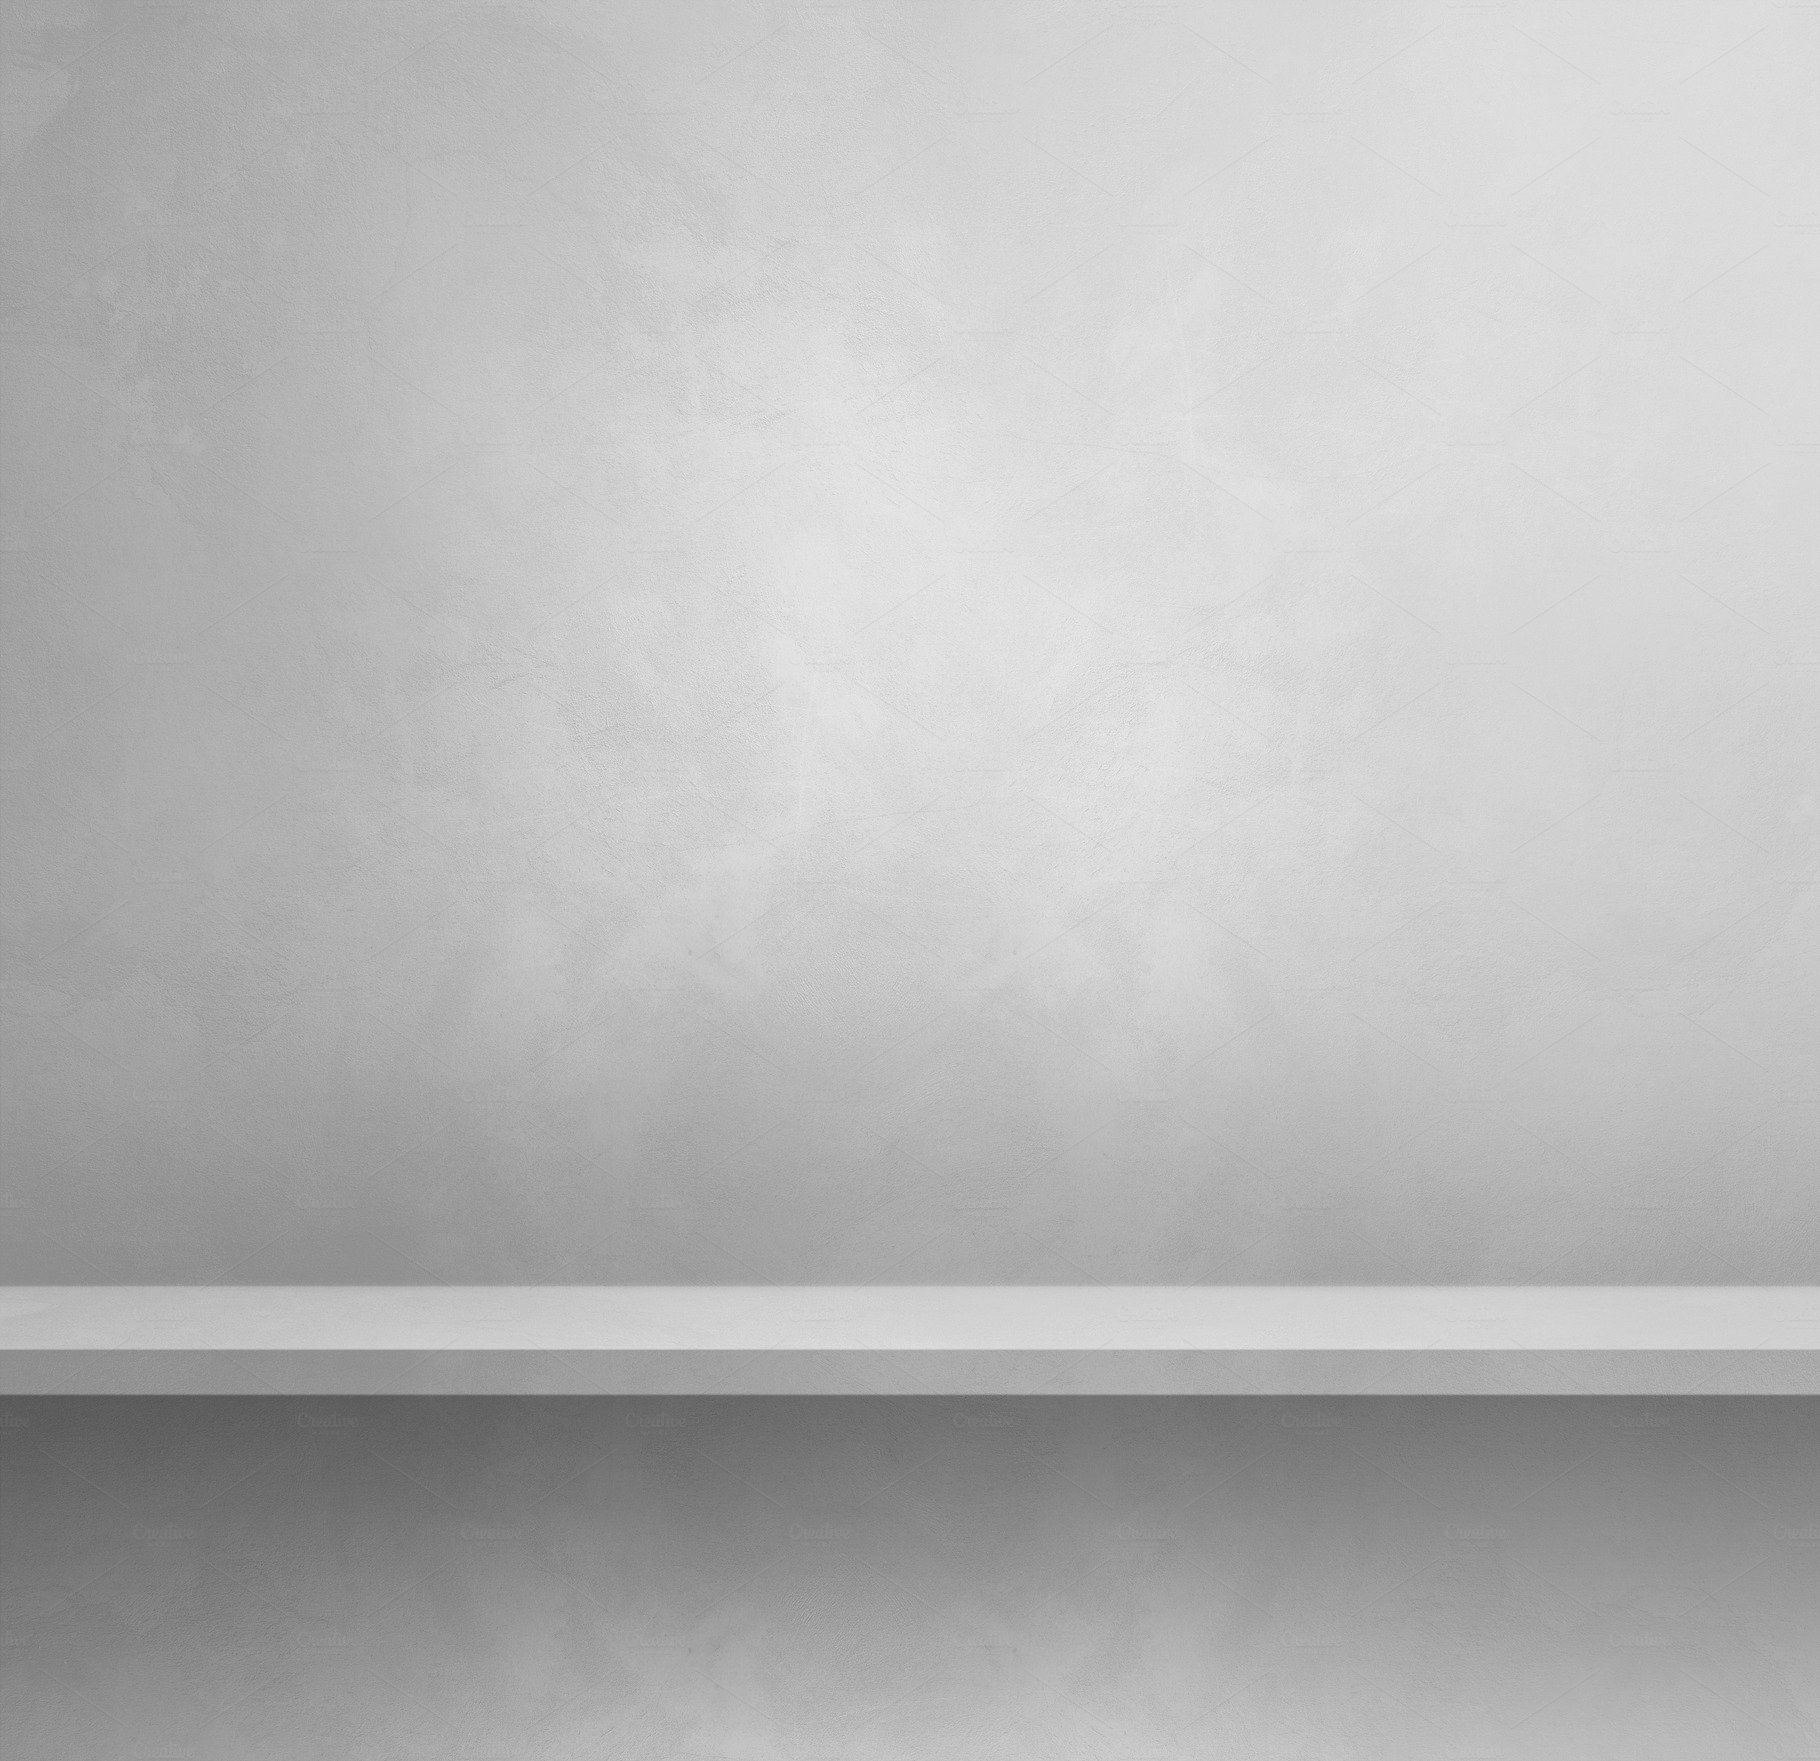 Empty shelf on a white wall. Background template. Square banner cover image.